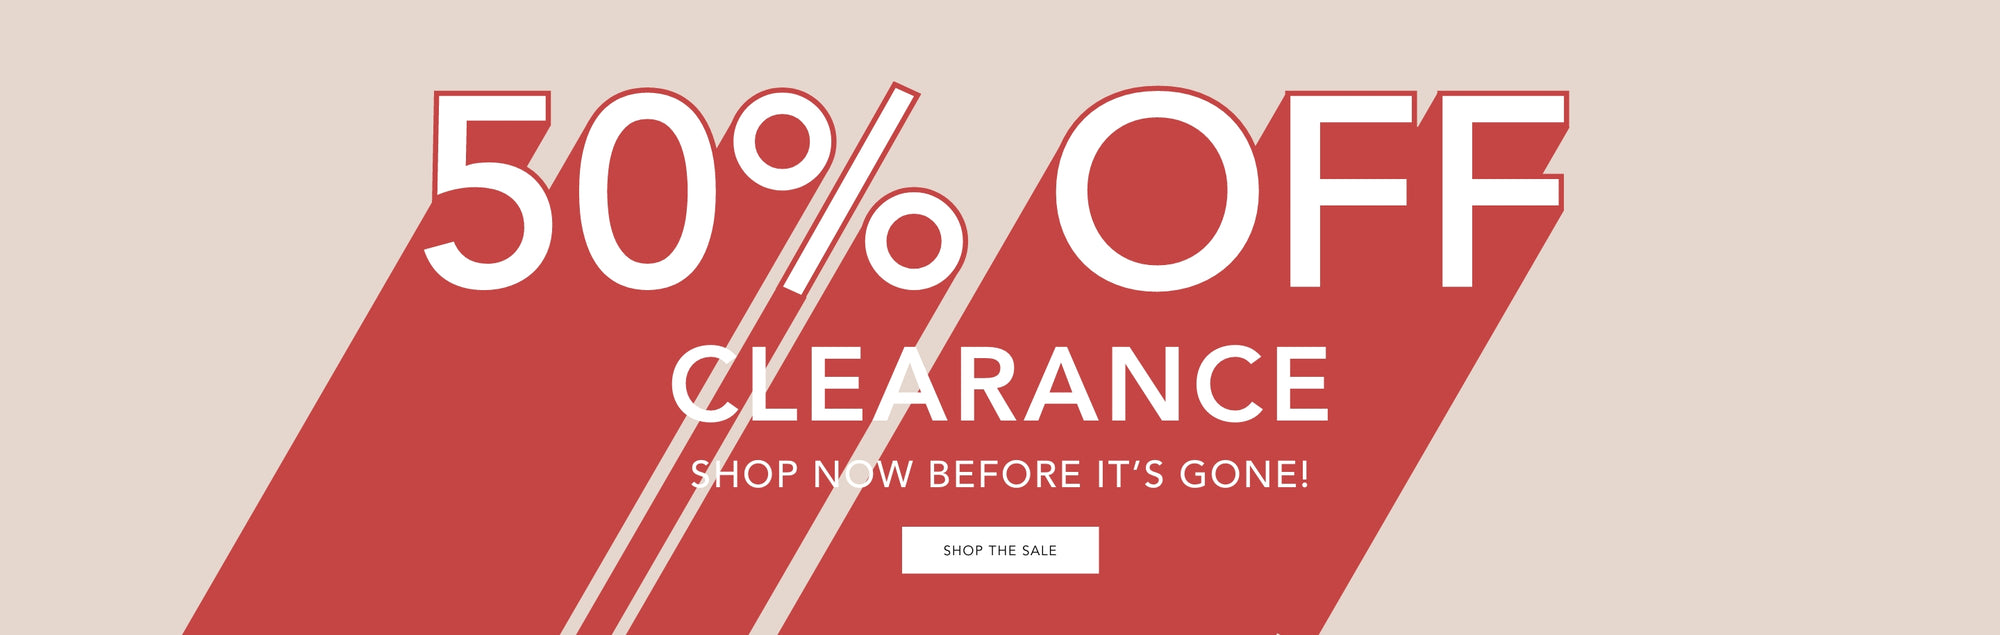 50% off clearance. Shop now before it's gone!